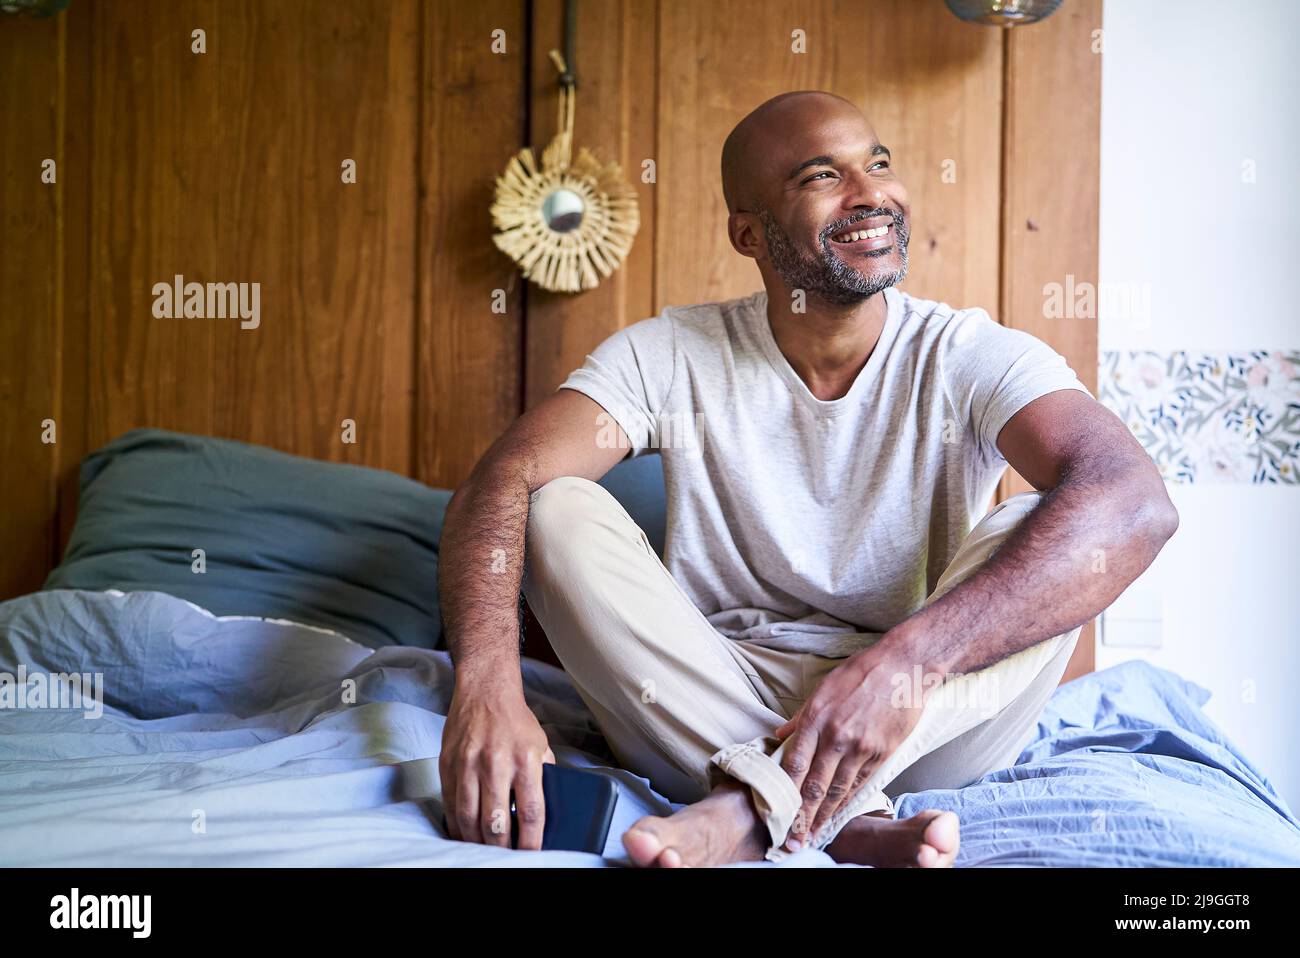 Smiling man holding smart phone while sitting in bedroom Stock Photo